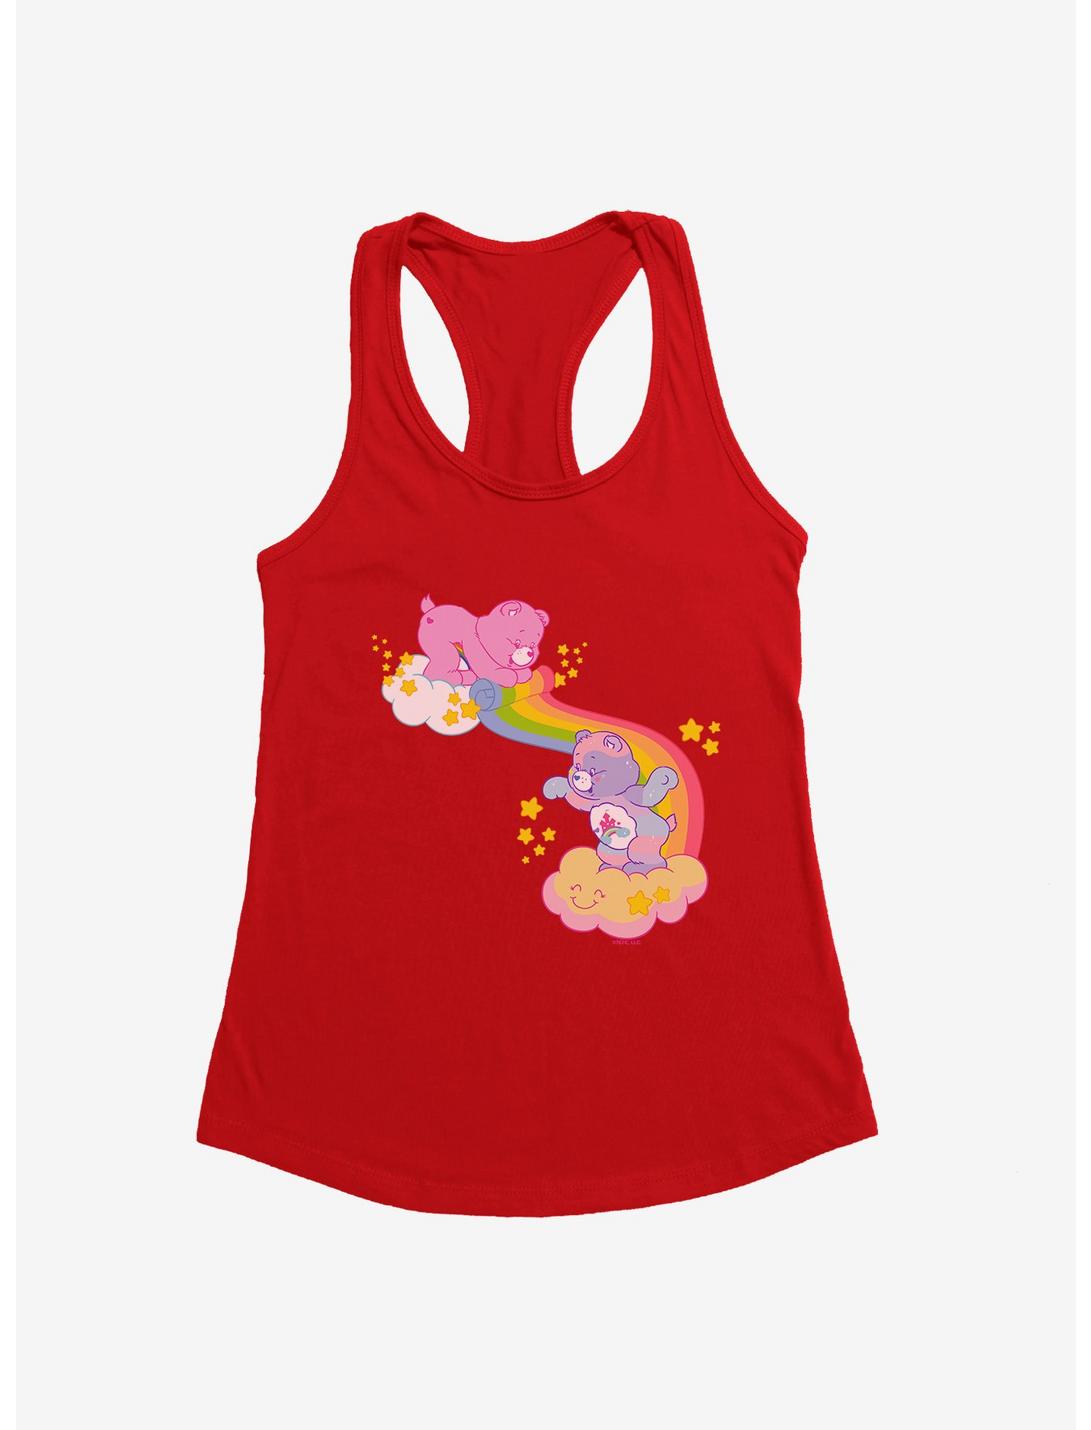 Care Bears In The Clouds Girls Tank, RED, hi-res